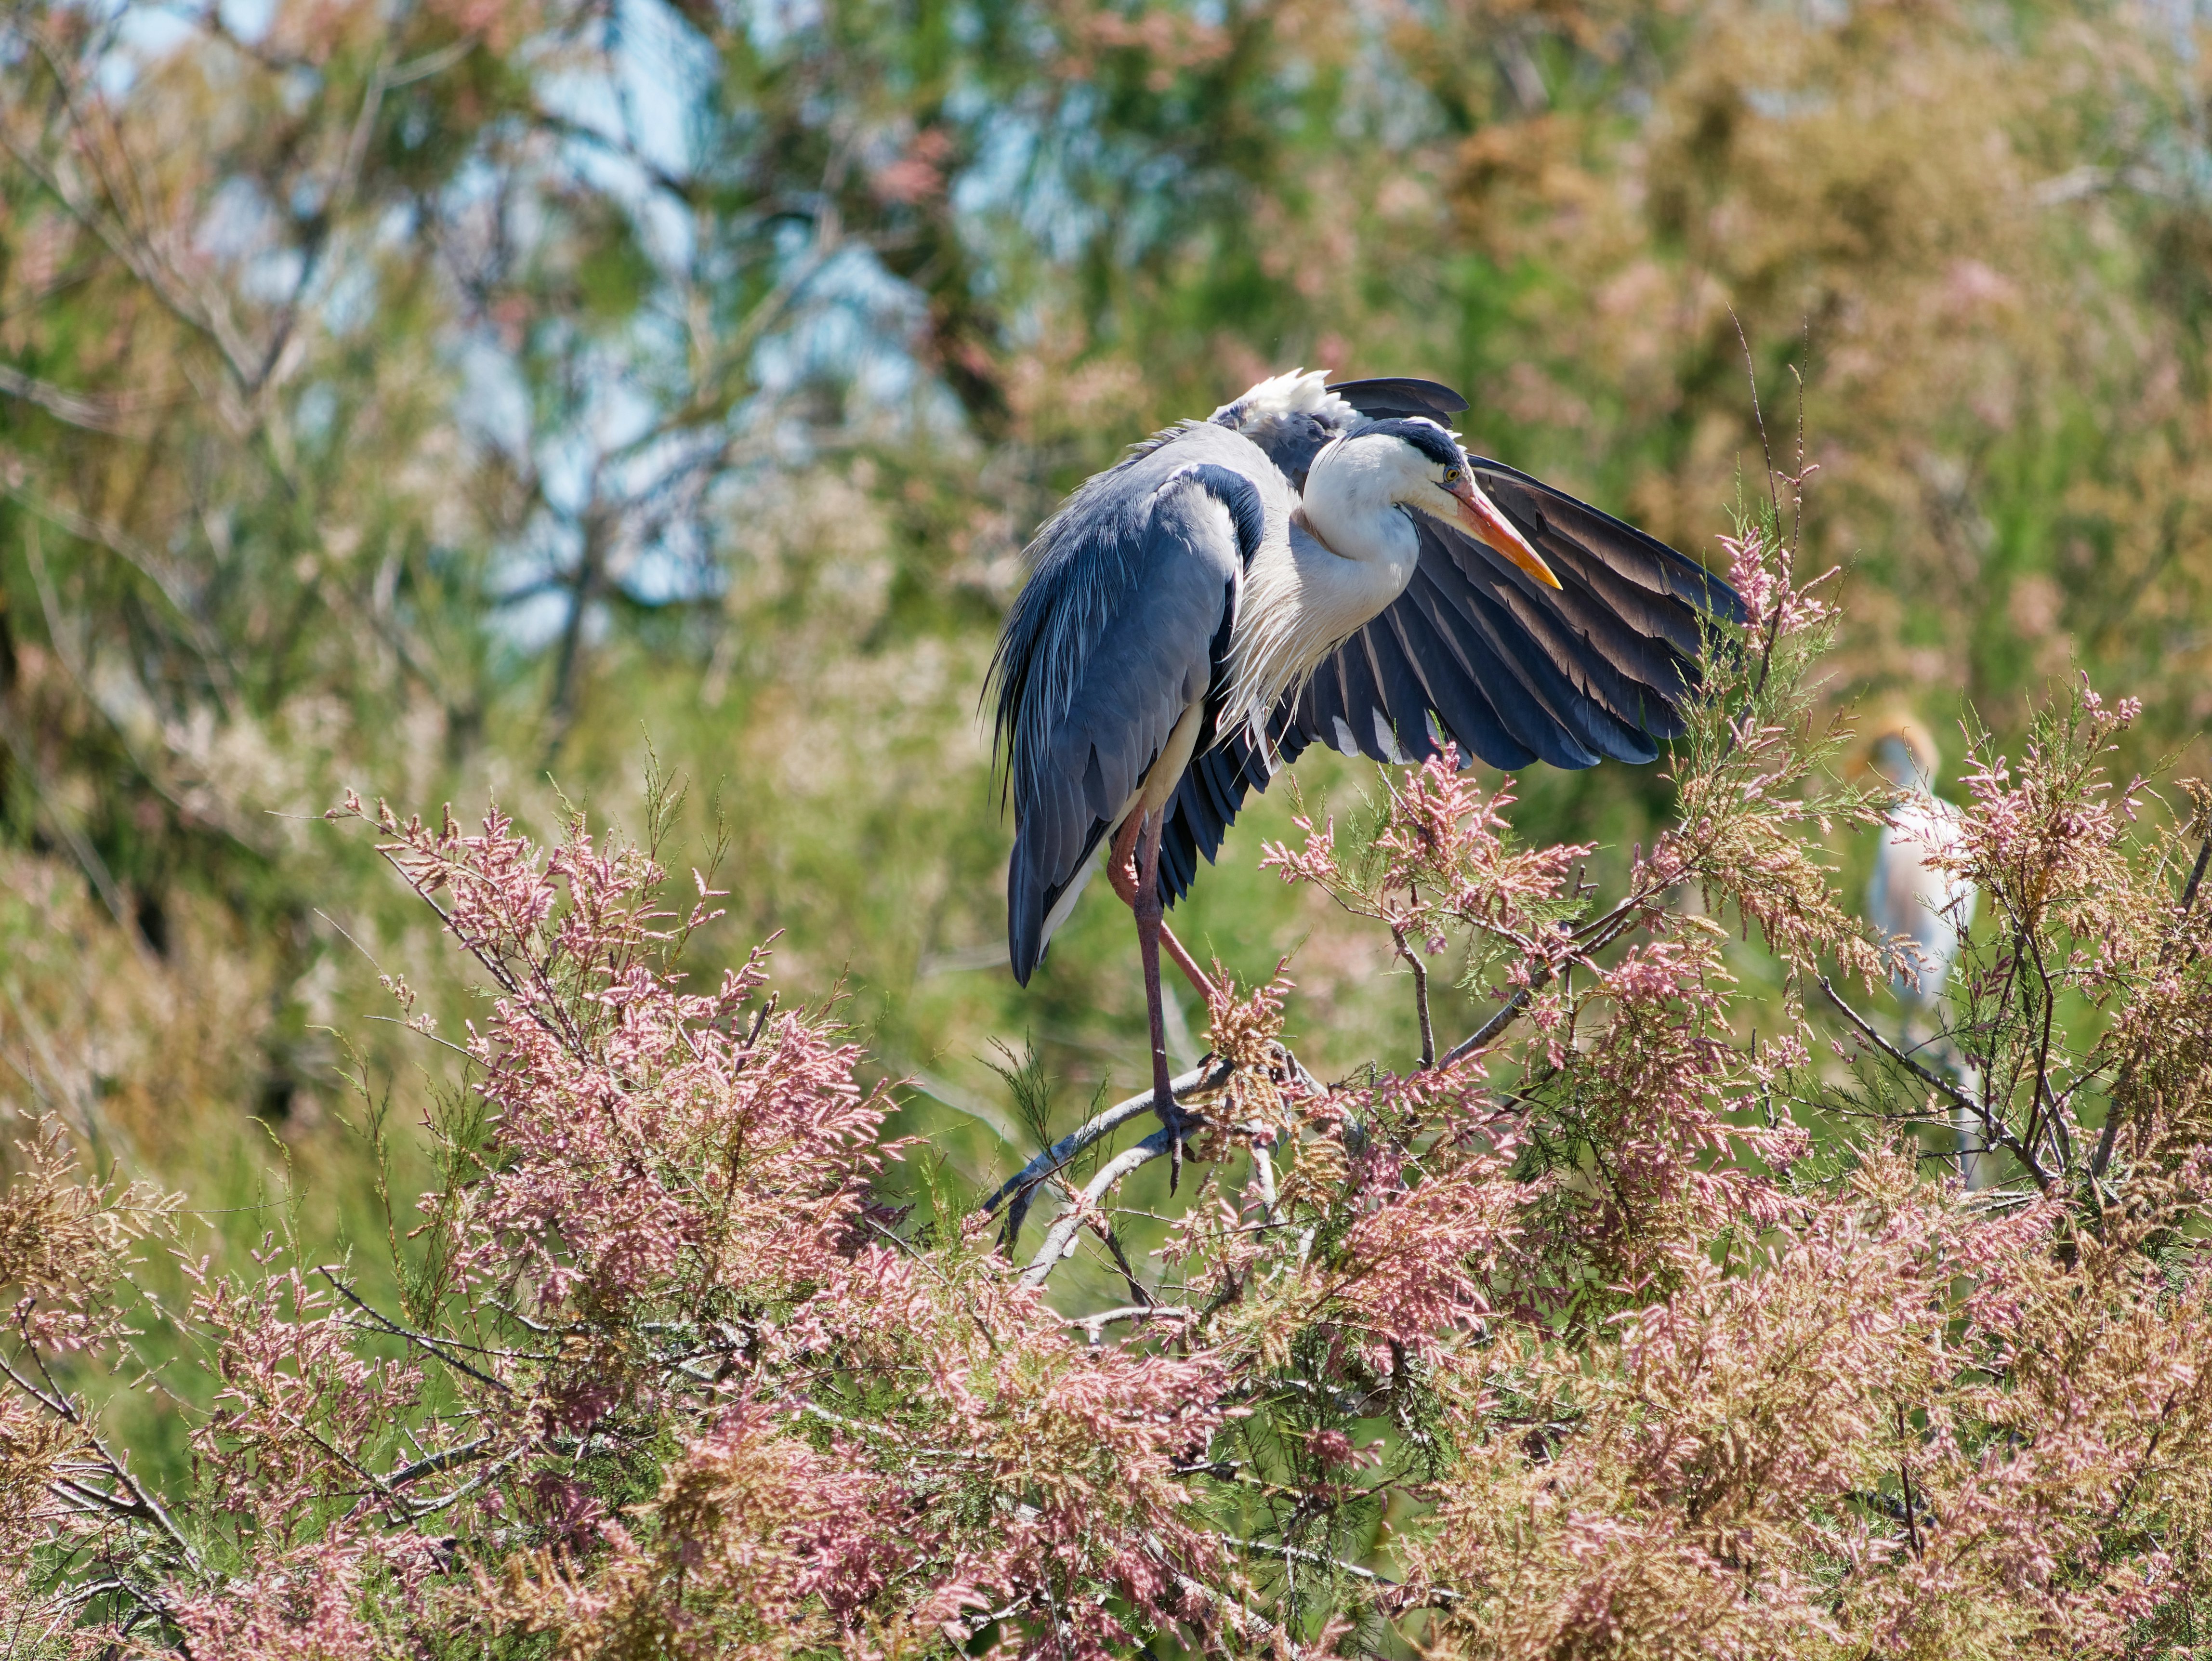 Grey Heron, during spring in an open Ornithological park in France.